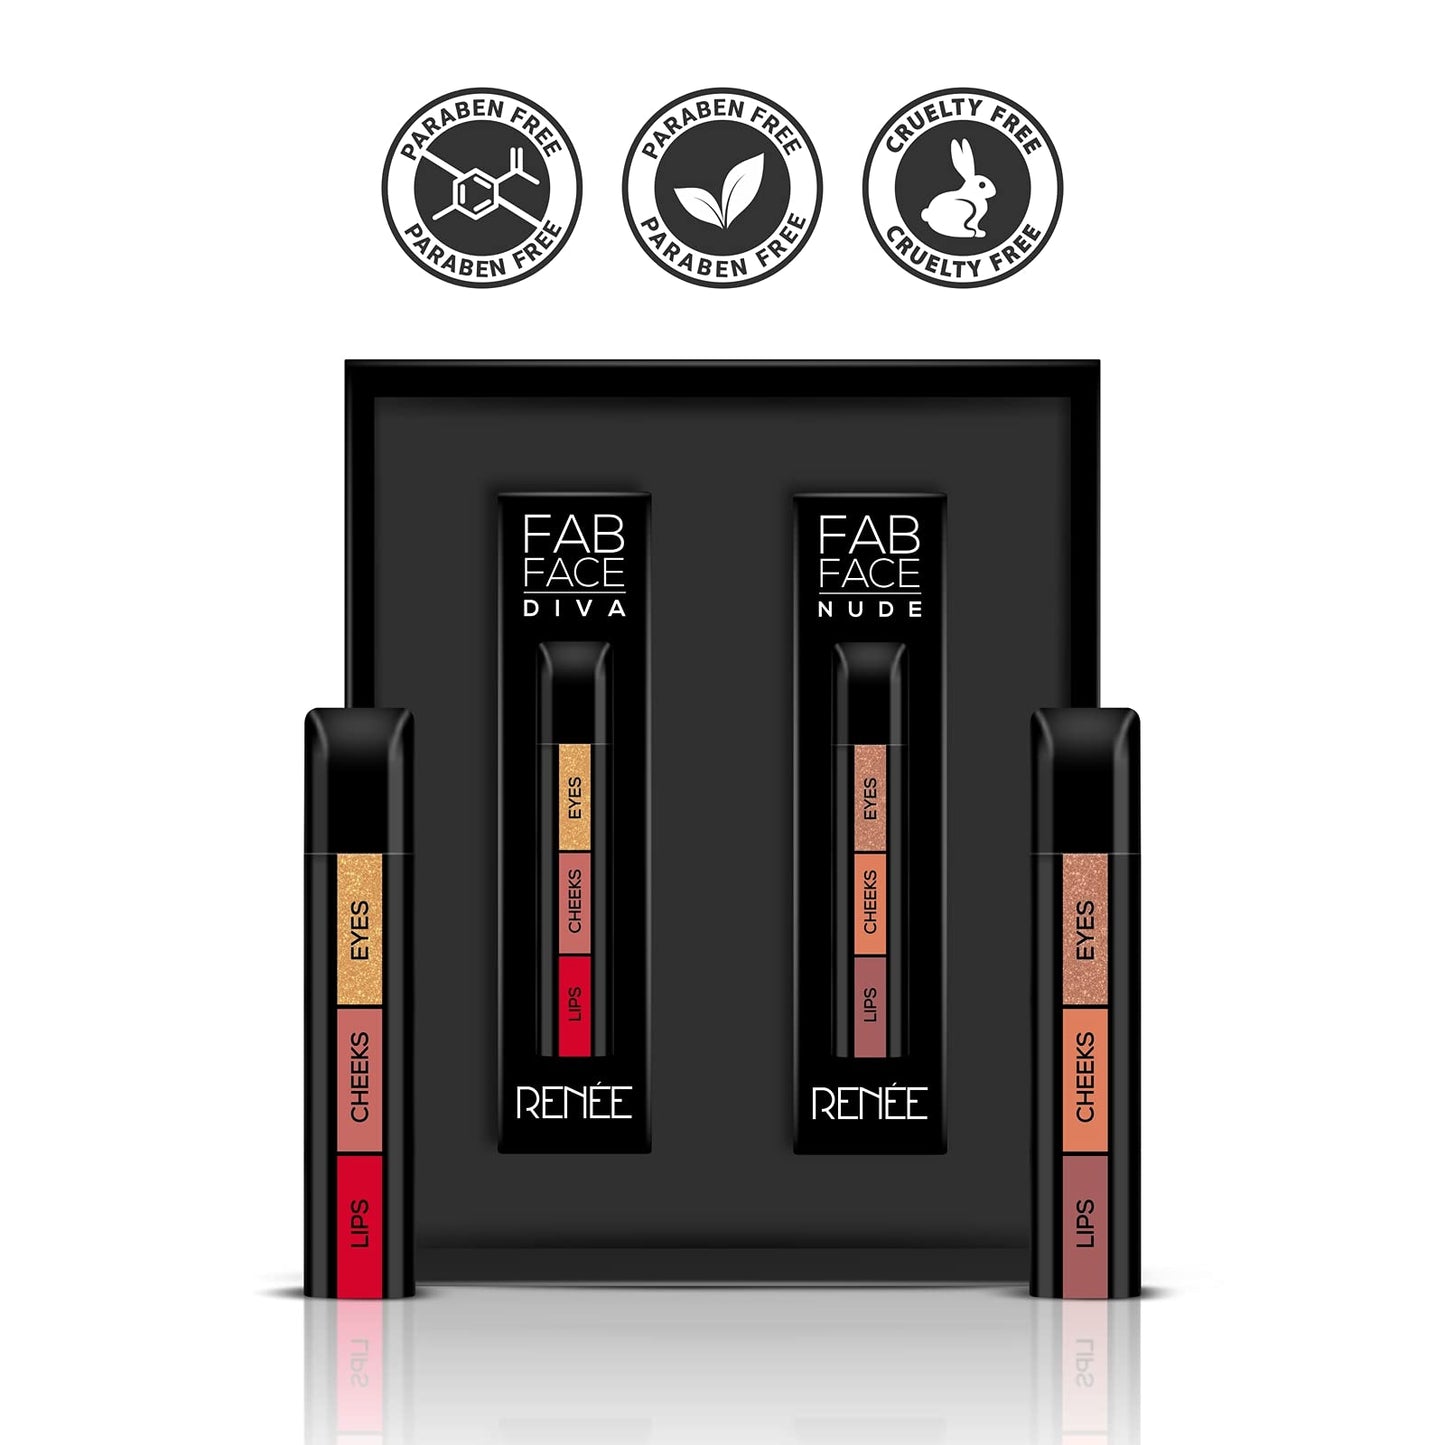 RENEE Fab Face 3 in 1 Makeup Stick Combo 4.5gm Each| Includes Eyeshadow, Blush & Lipstick| Infused With Vitamin E| Intense Color Payoff| Compact & Travel Friendly